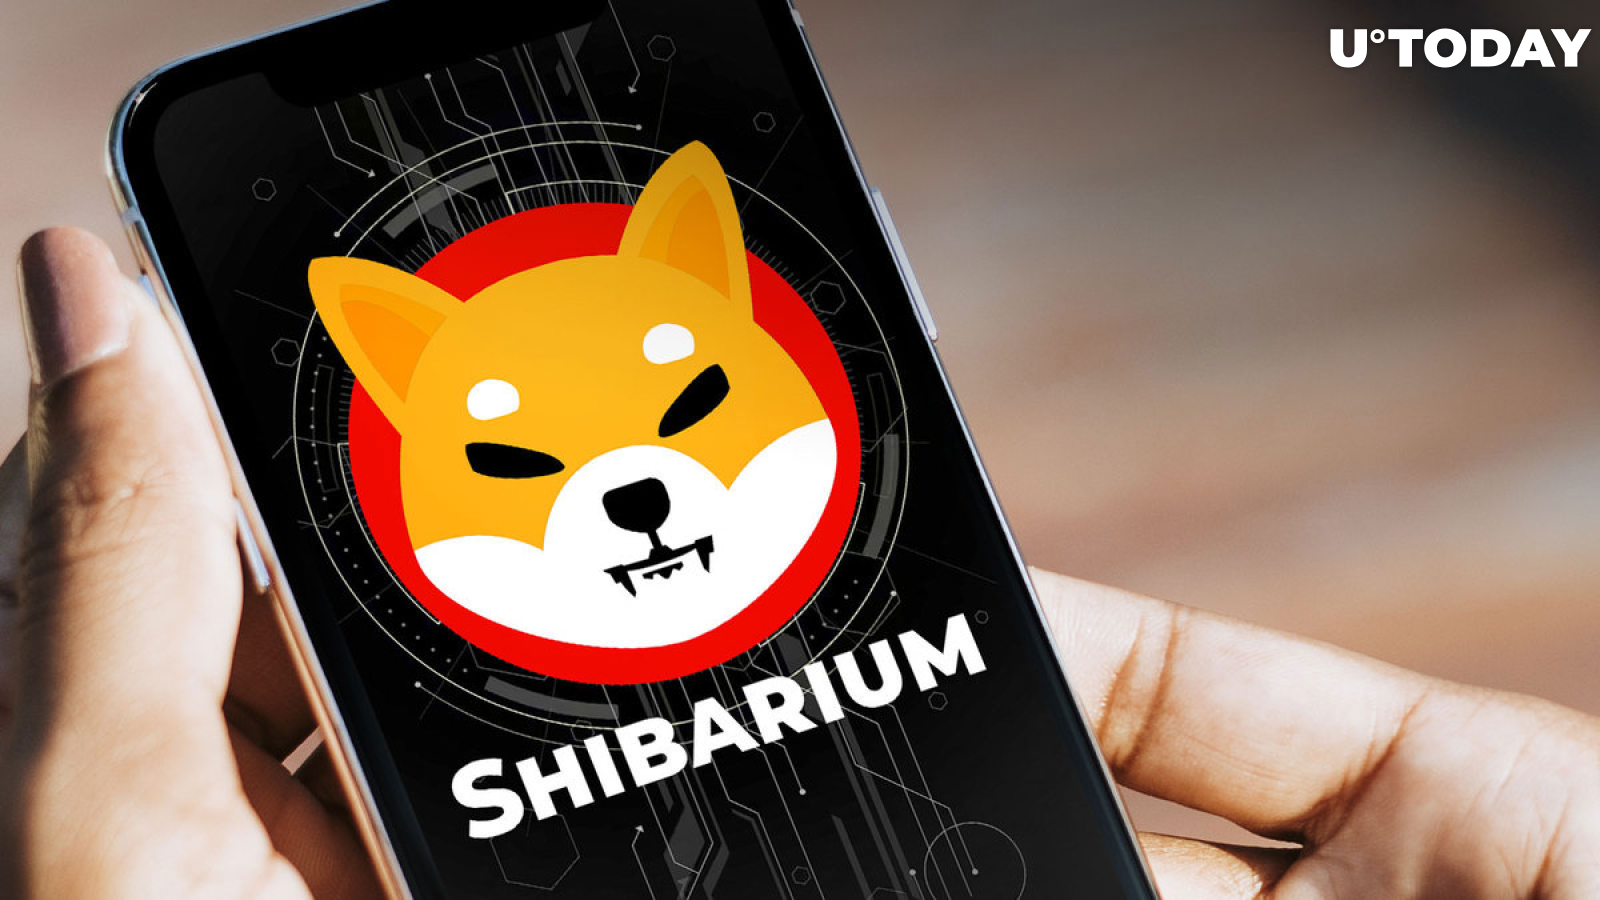 Shibarium Testnet Increases With 13 Million Interacting Wallets: Details